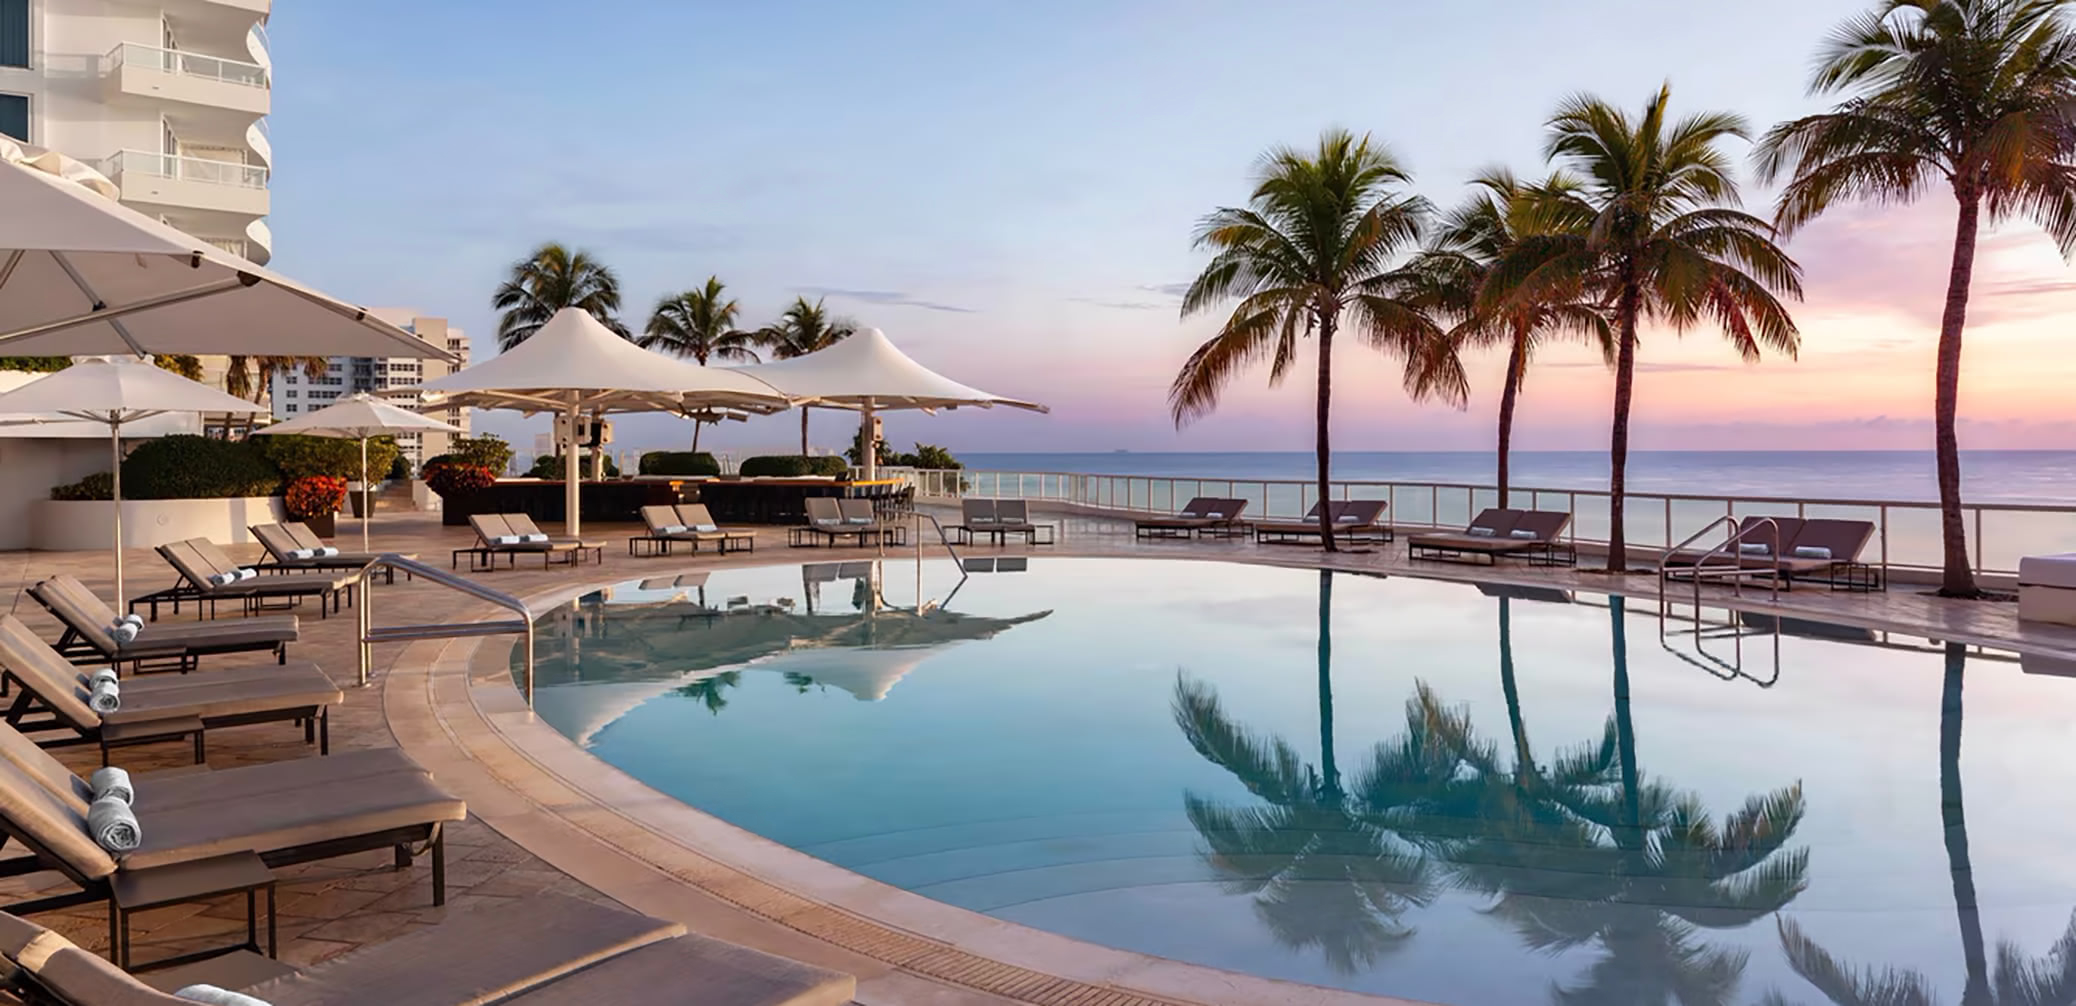 Review: The Ritz-Carlton, Fort Lauderdale